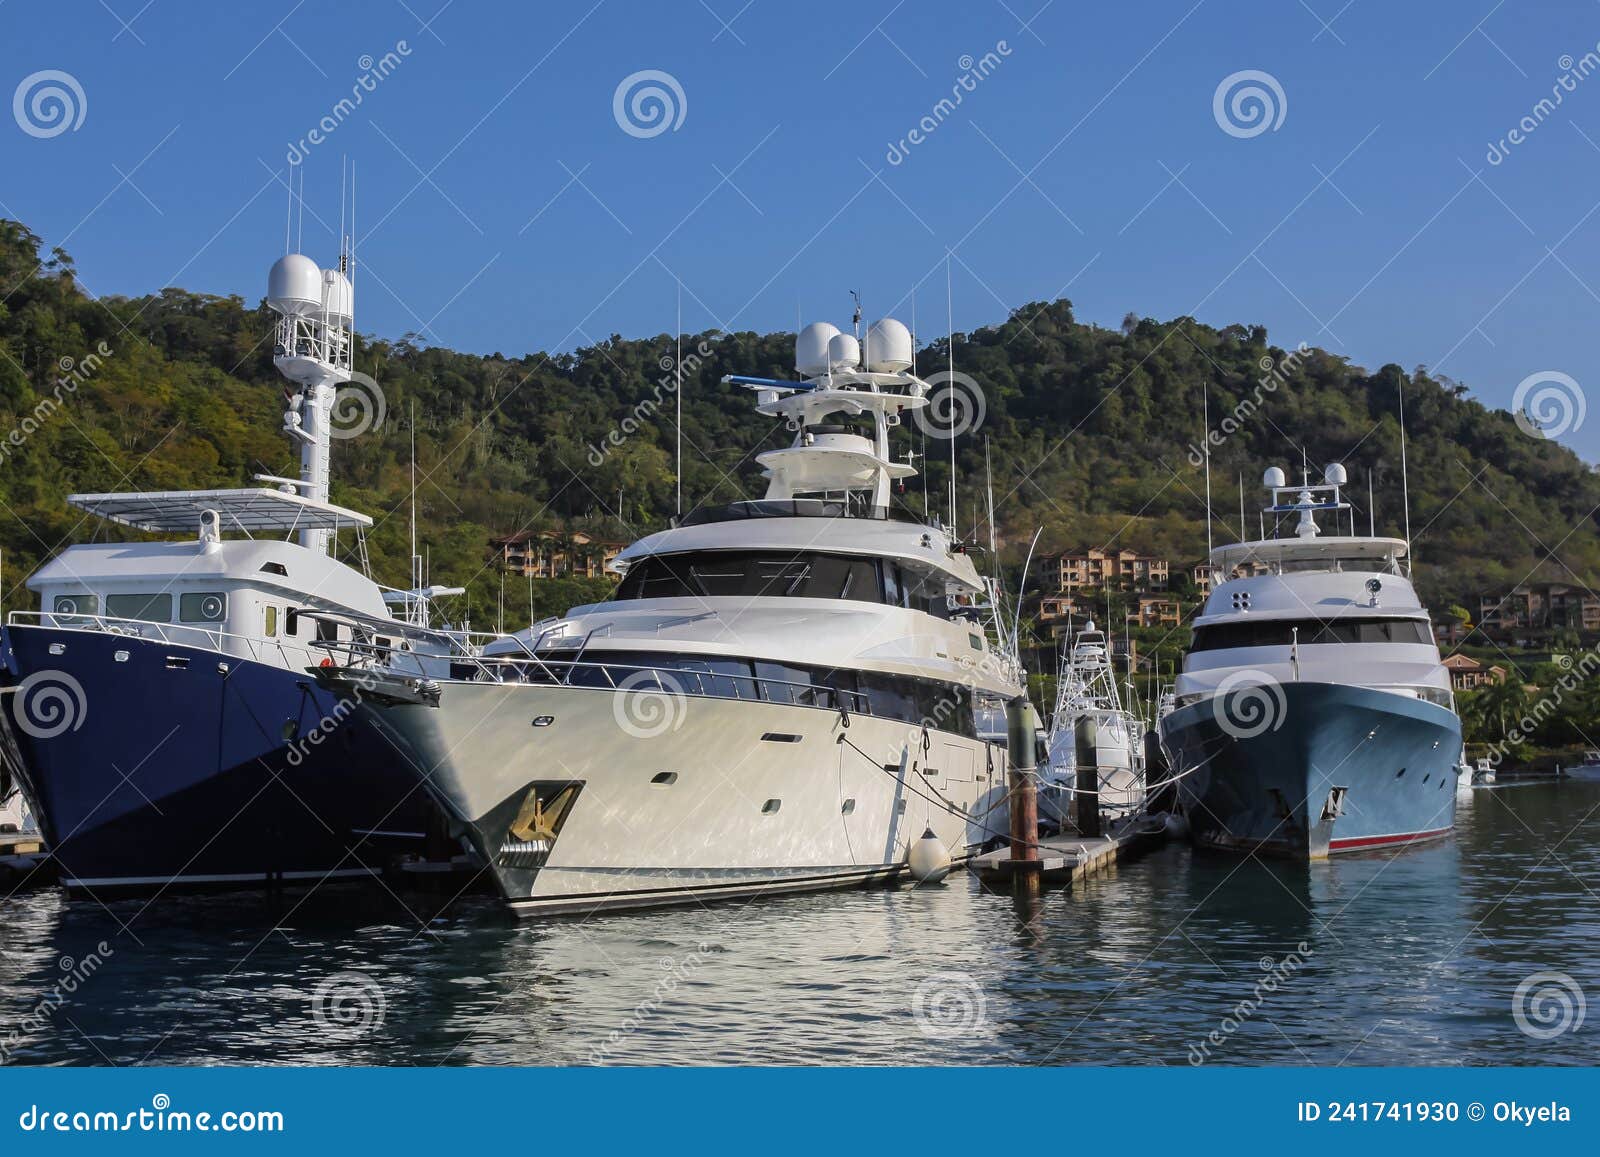 pleasure and tourist yachts in the parking lot in bay on the oceanic coast in a central american country